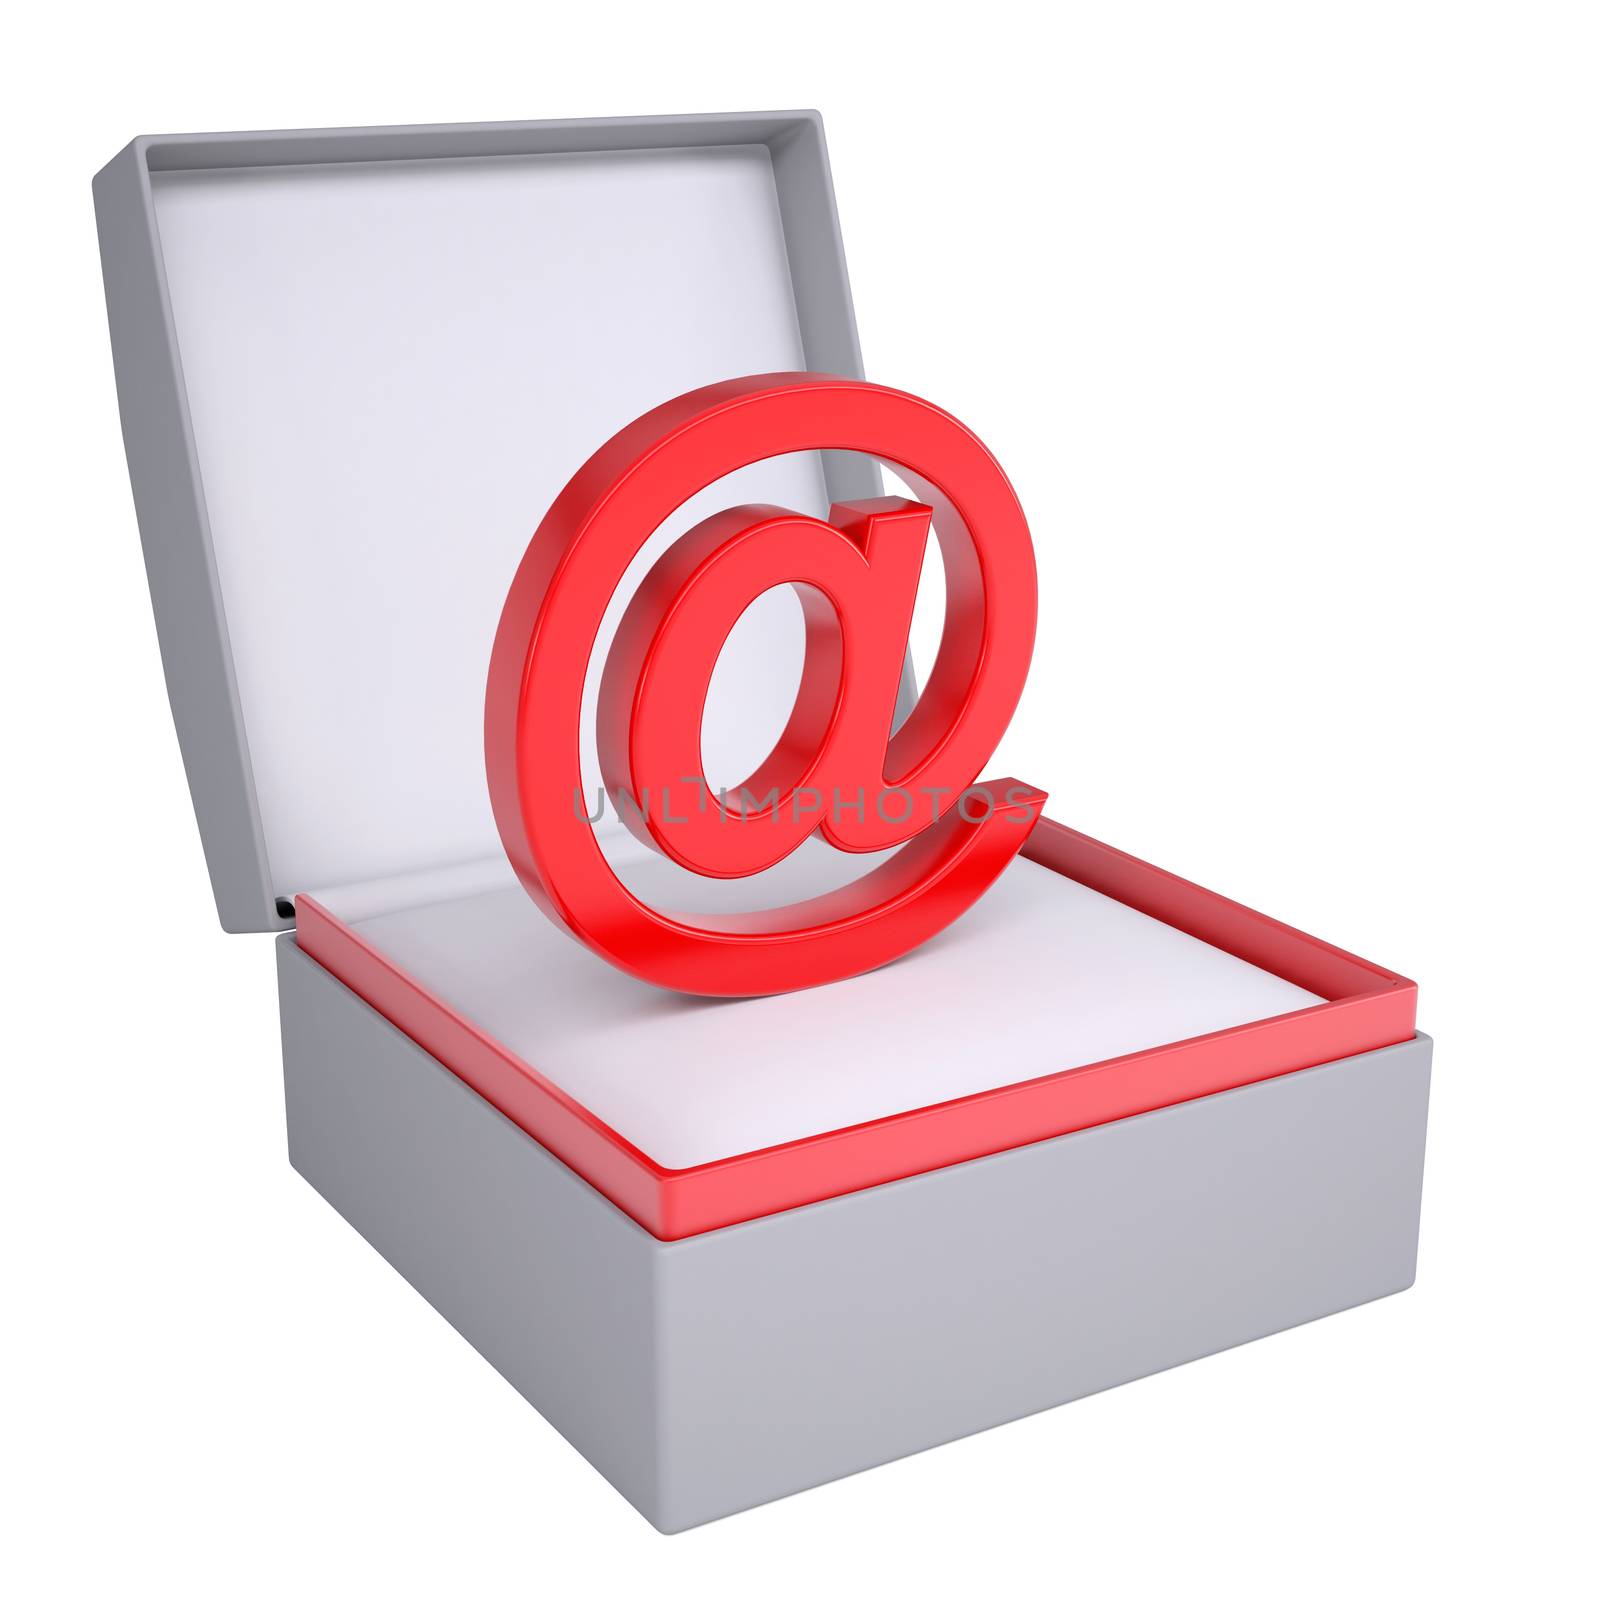 Email sign in open gift box. 3d render isolated on white background